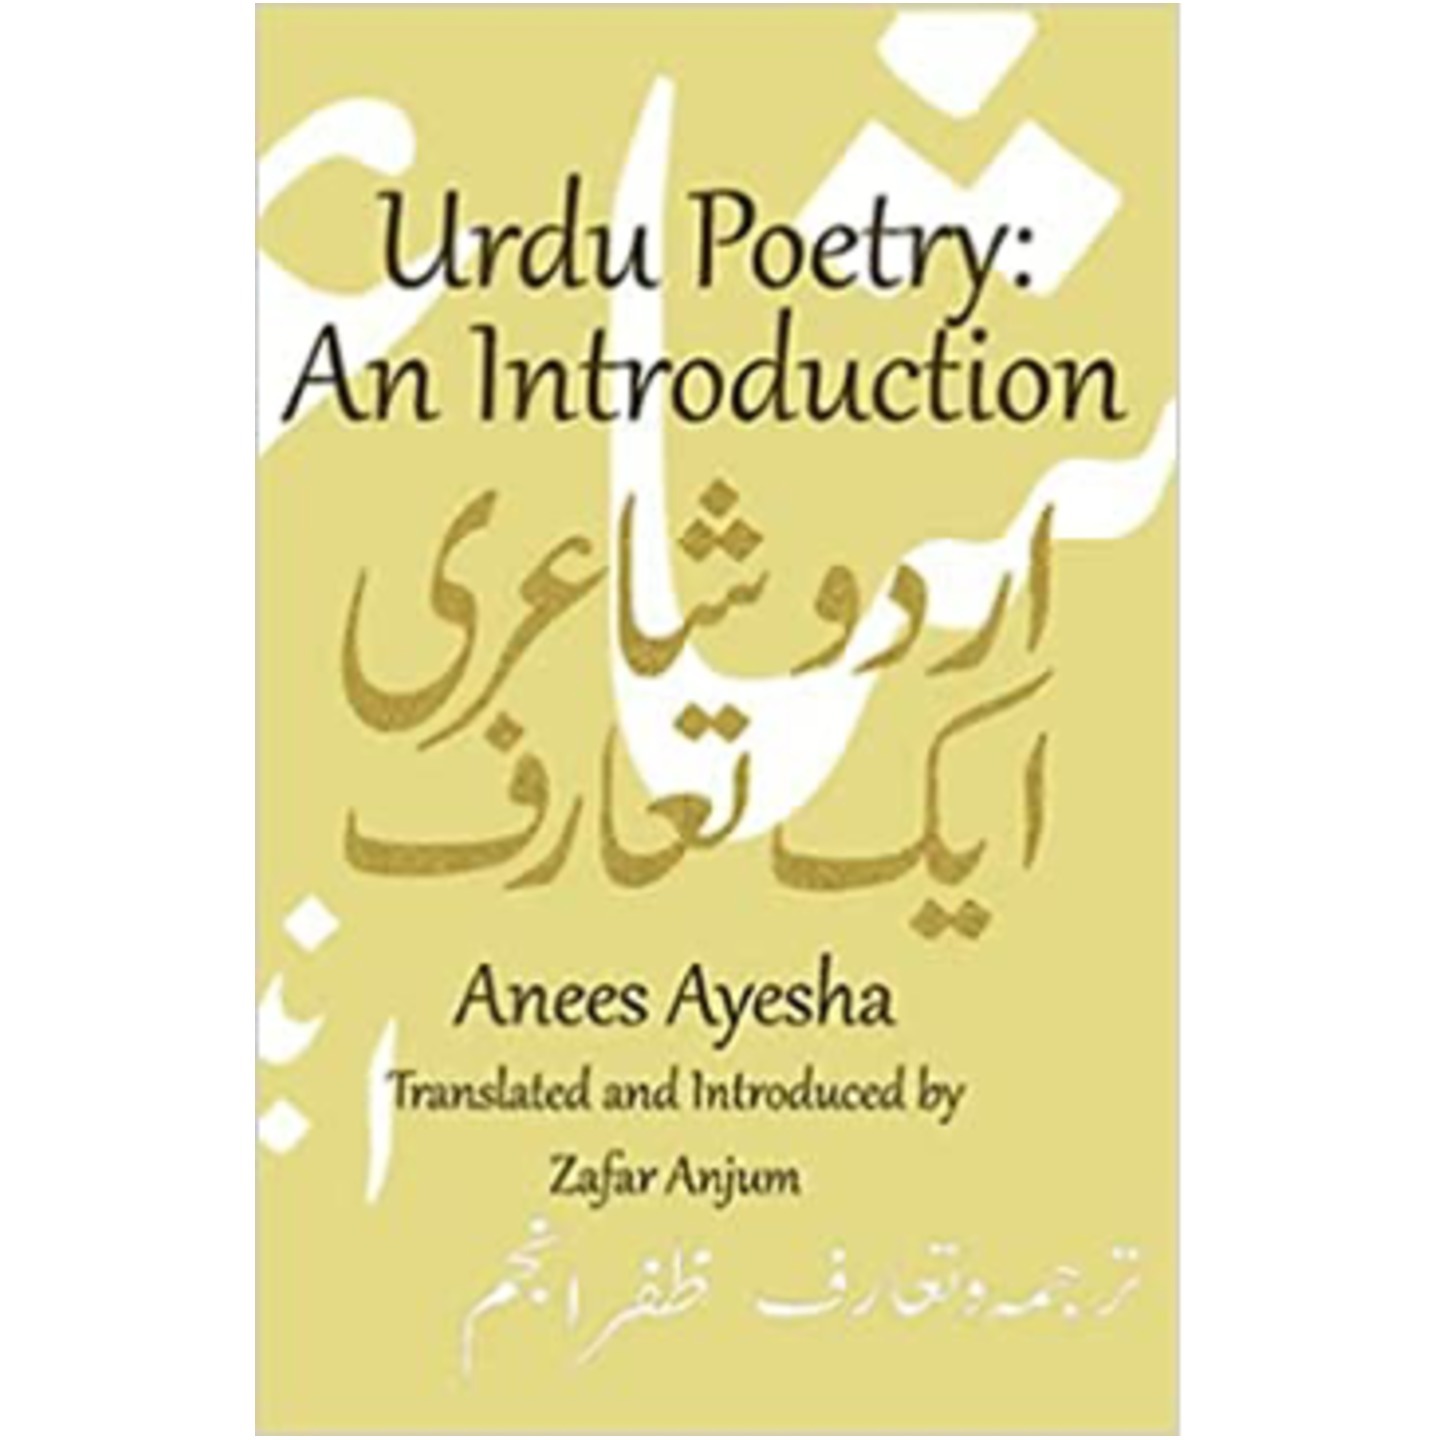 Urdu Poetry An Introduction by Anees Ayesha